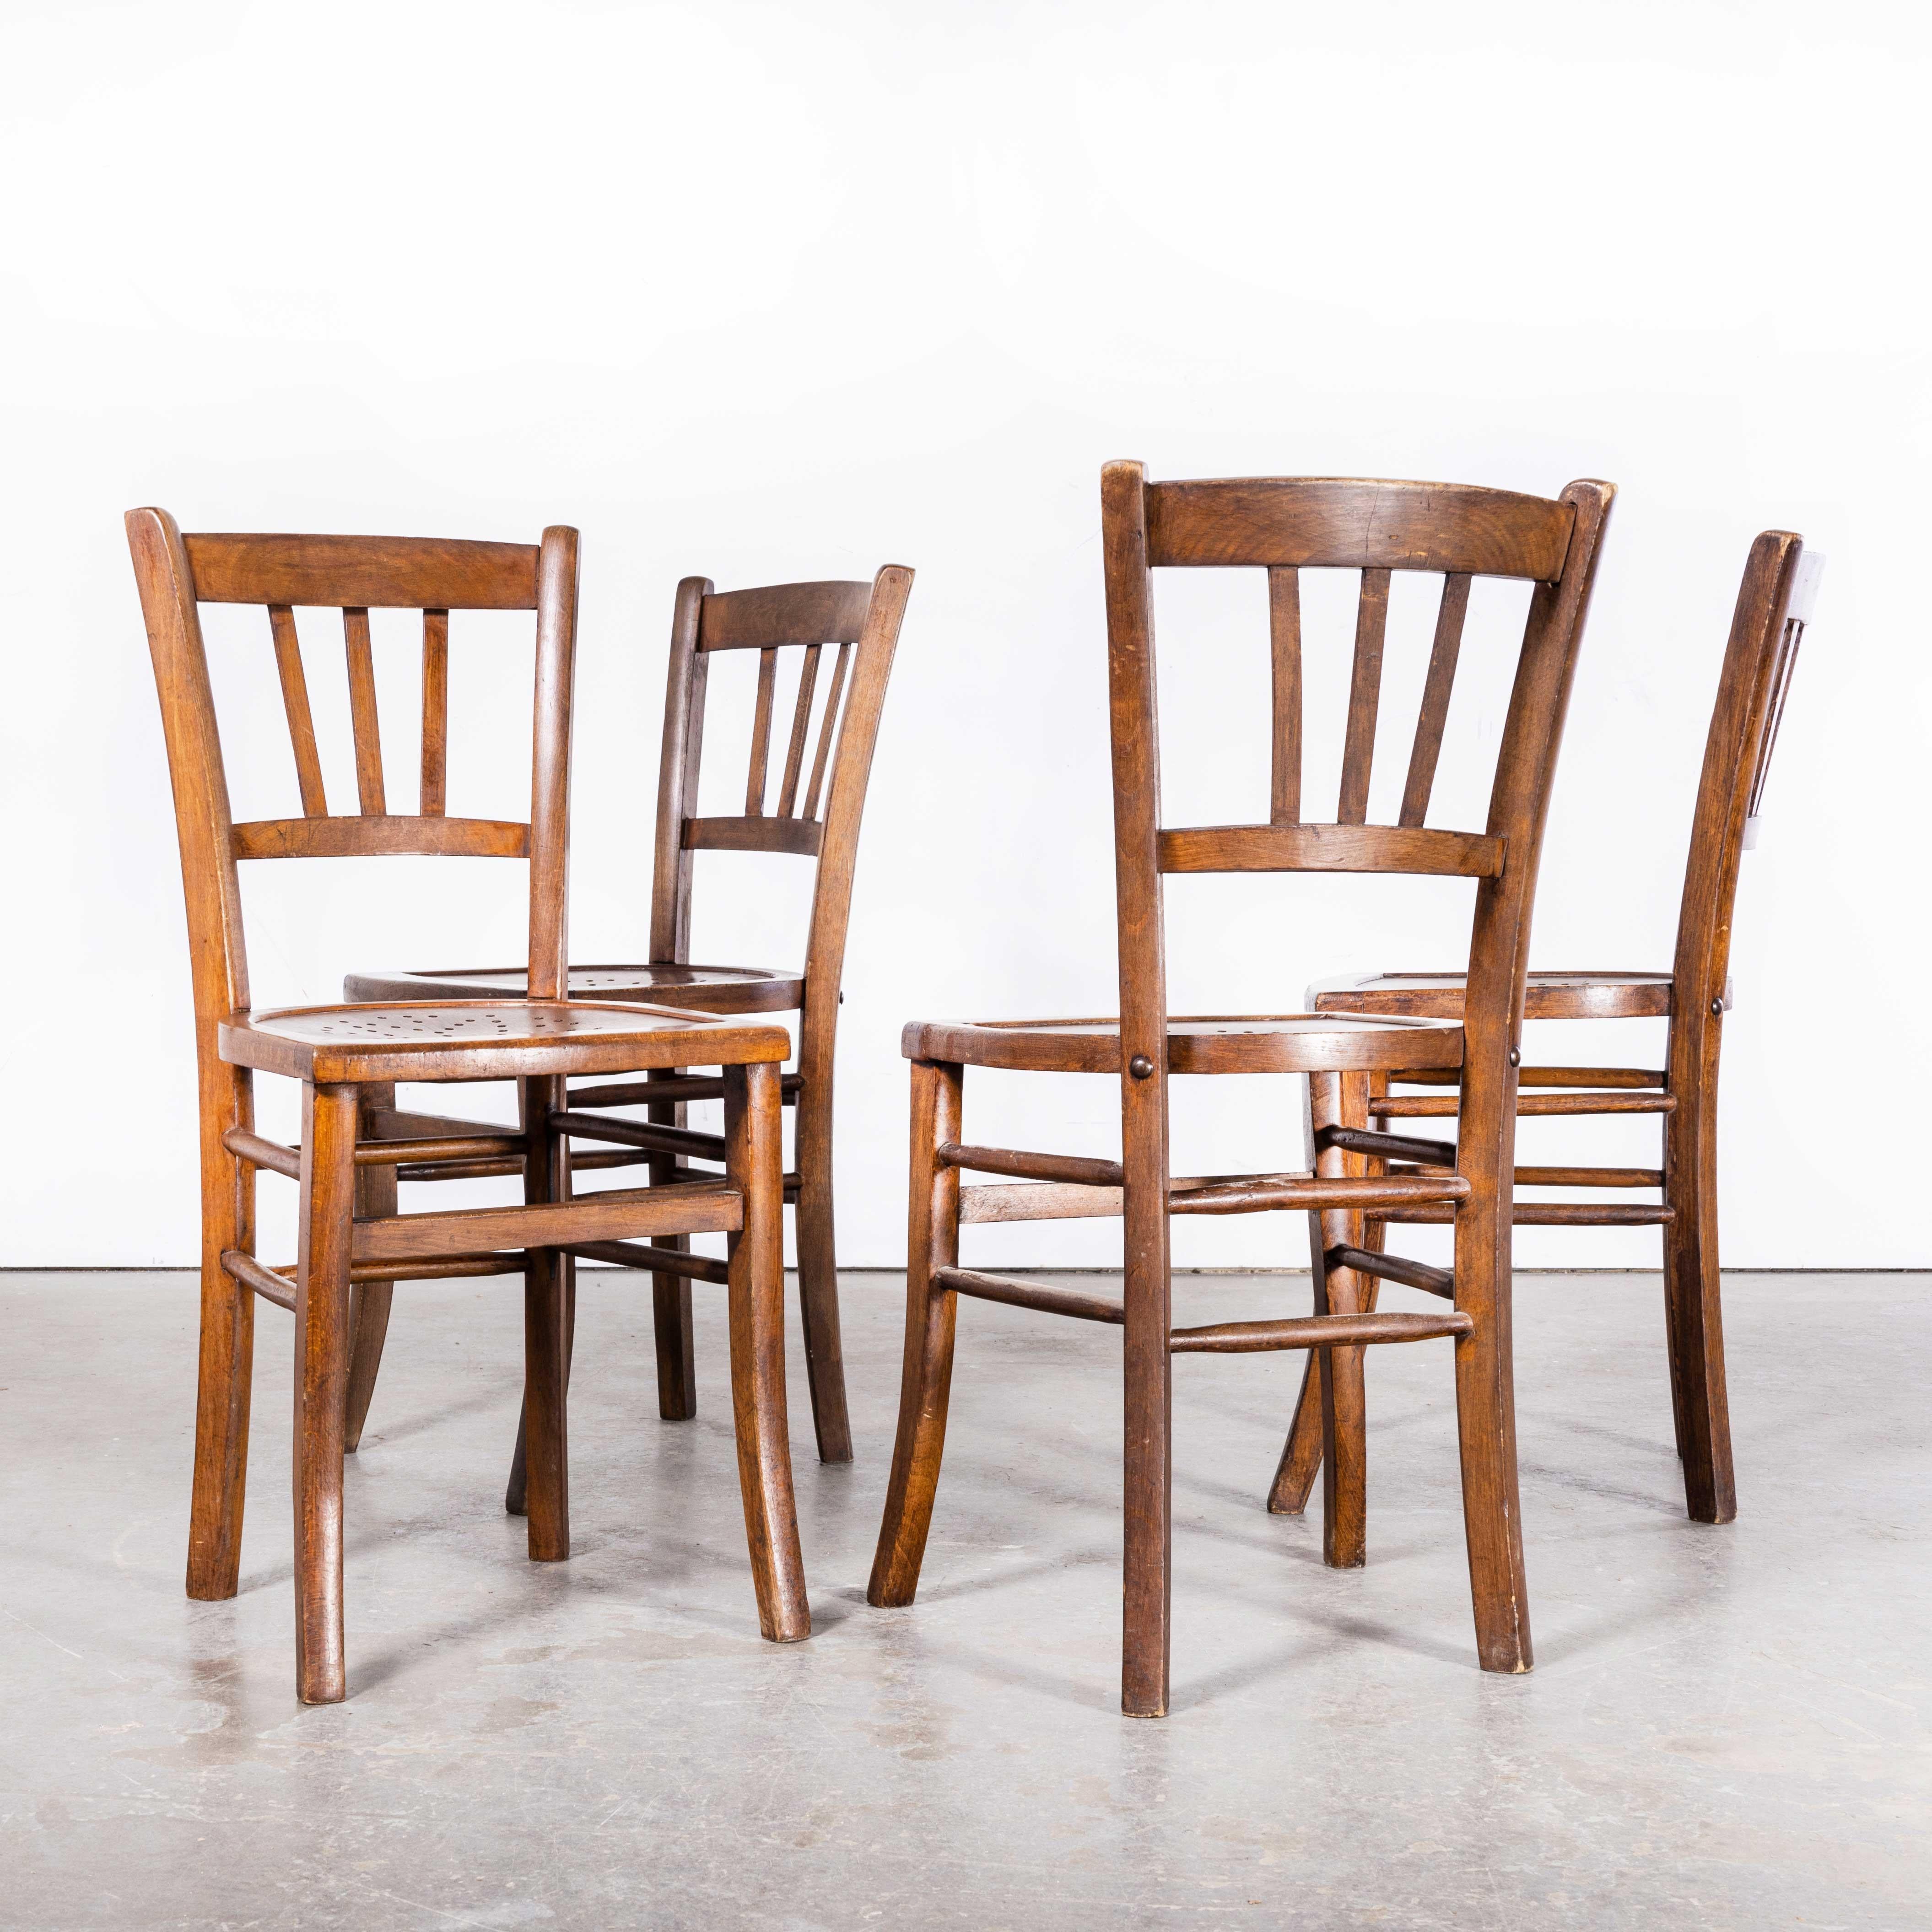 1940's Original French Farmhouse Chairs From Provence - Set Of Four 6